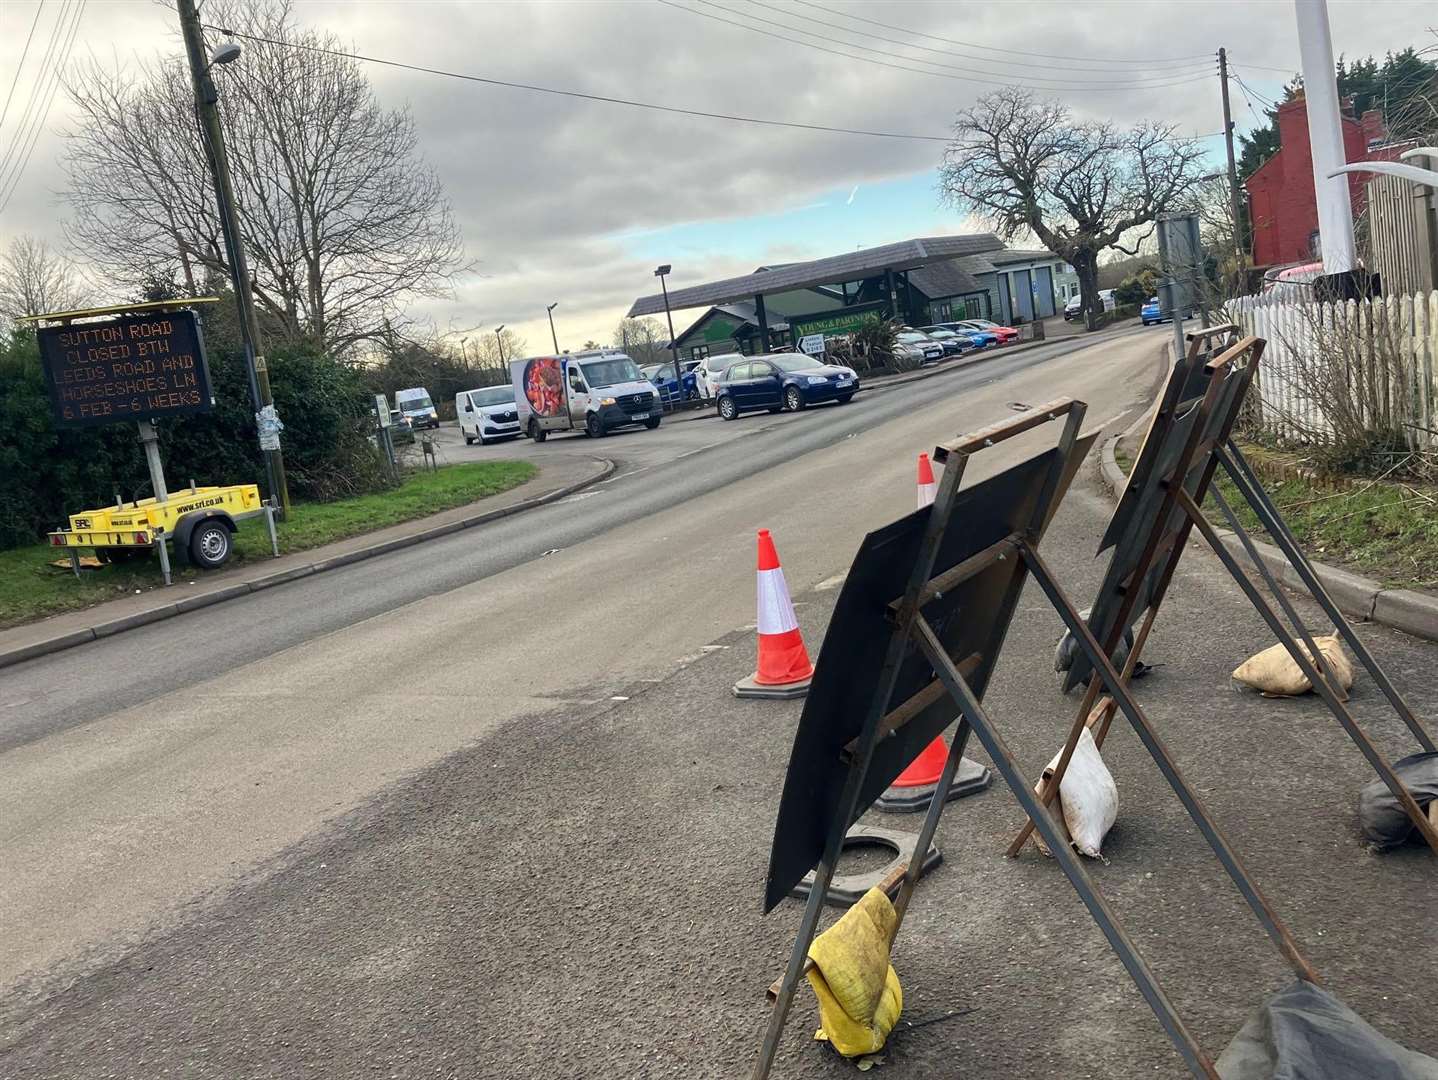 The back road, which connects the A274 and the A20, was shut for more than two months while South East Water laid new pipes.